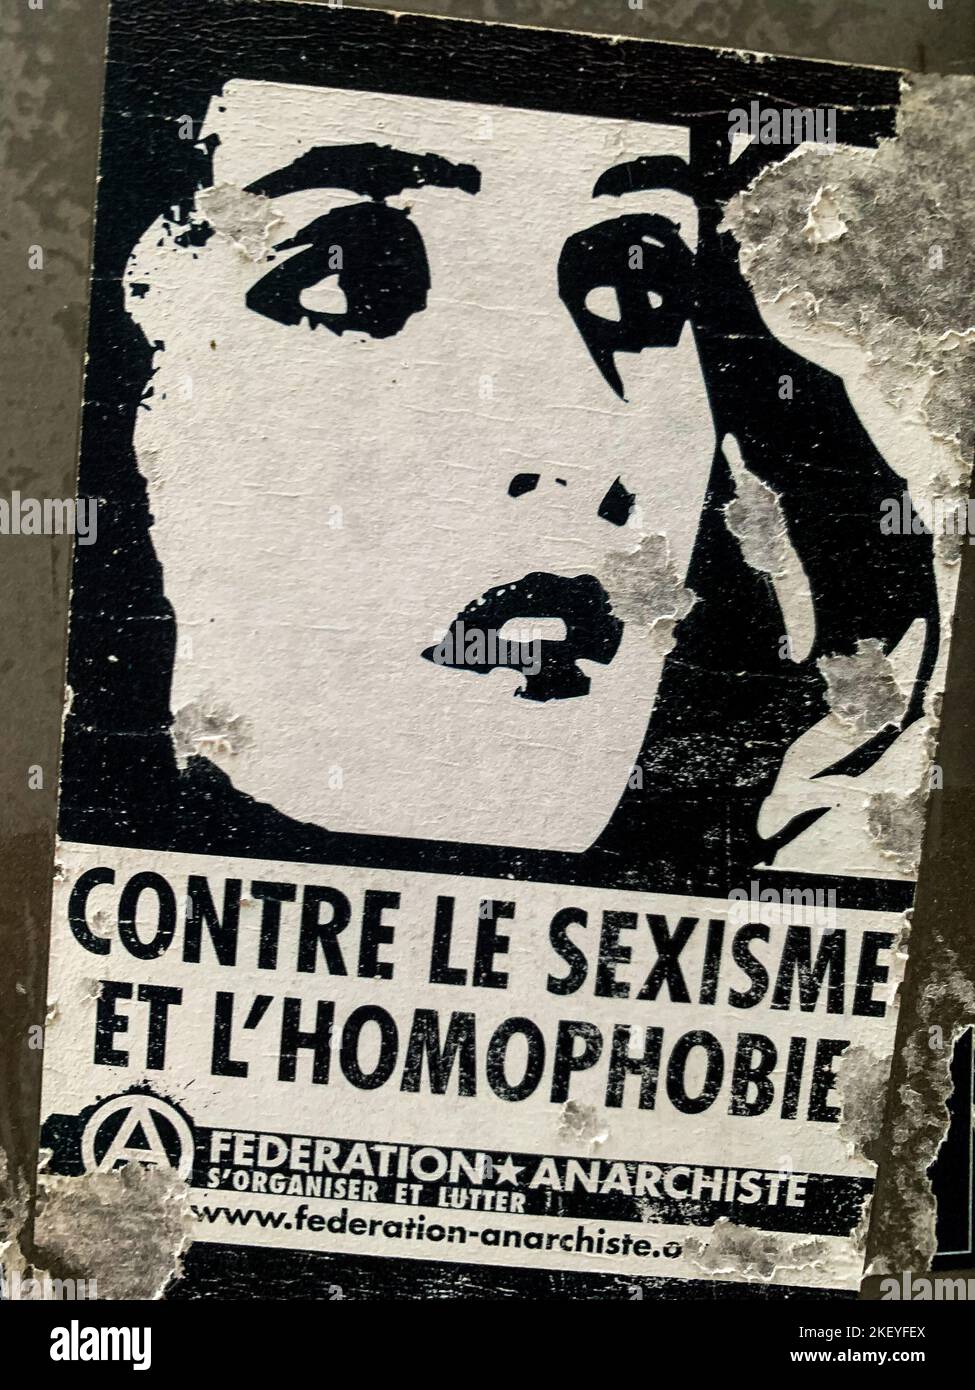 Anarchist campaign against sexism and homophobia, Metz, France Stock Photo